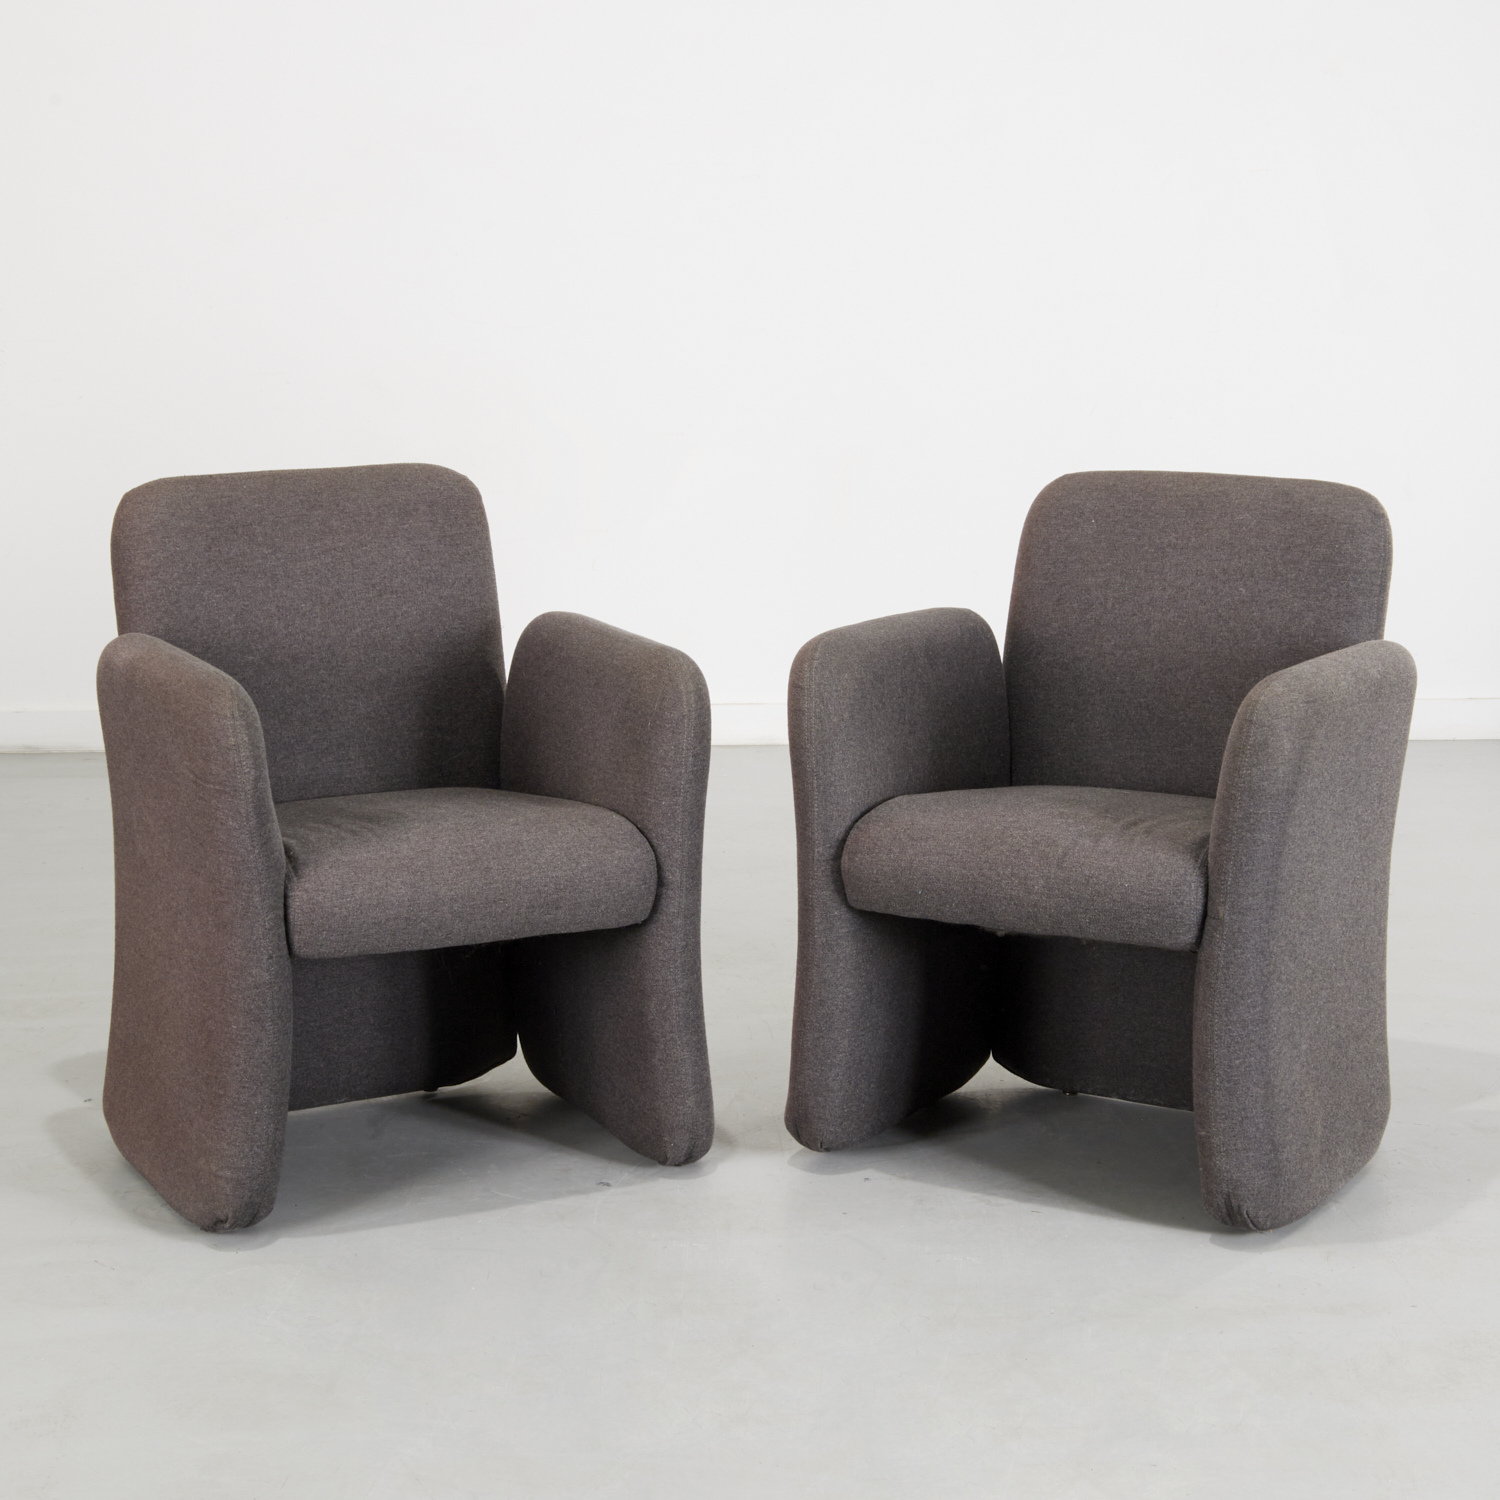 PAIR 'CHICLET' STYLE UPHOLSTERED